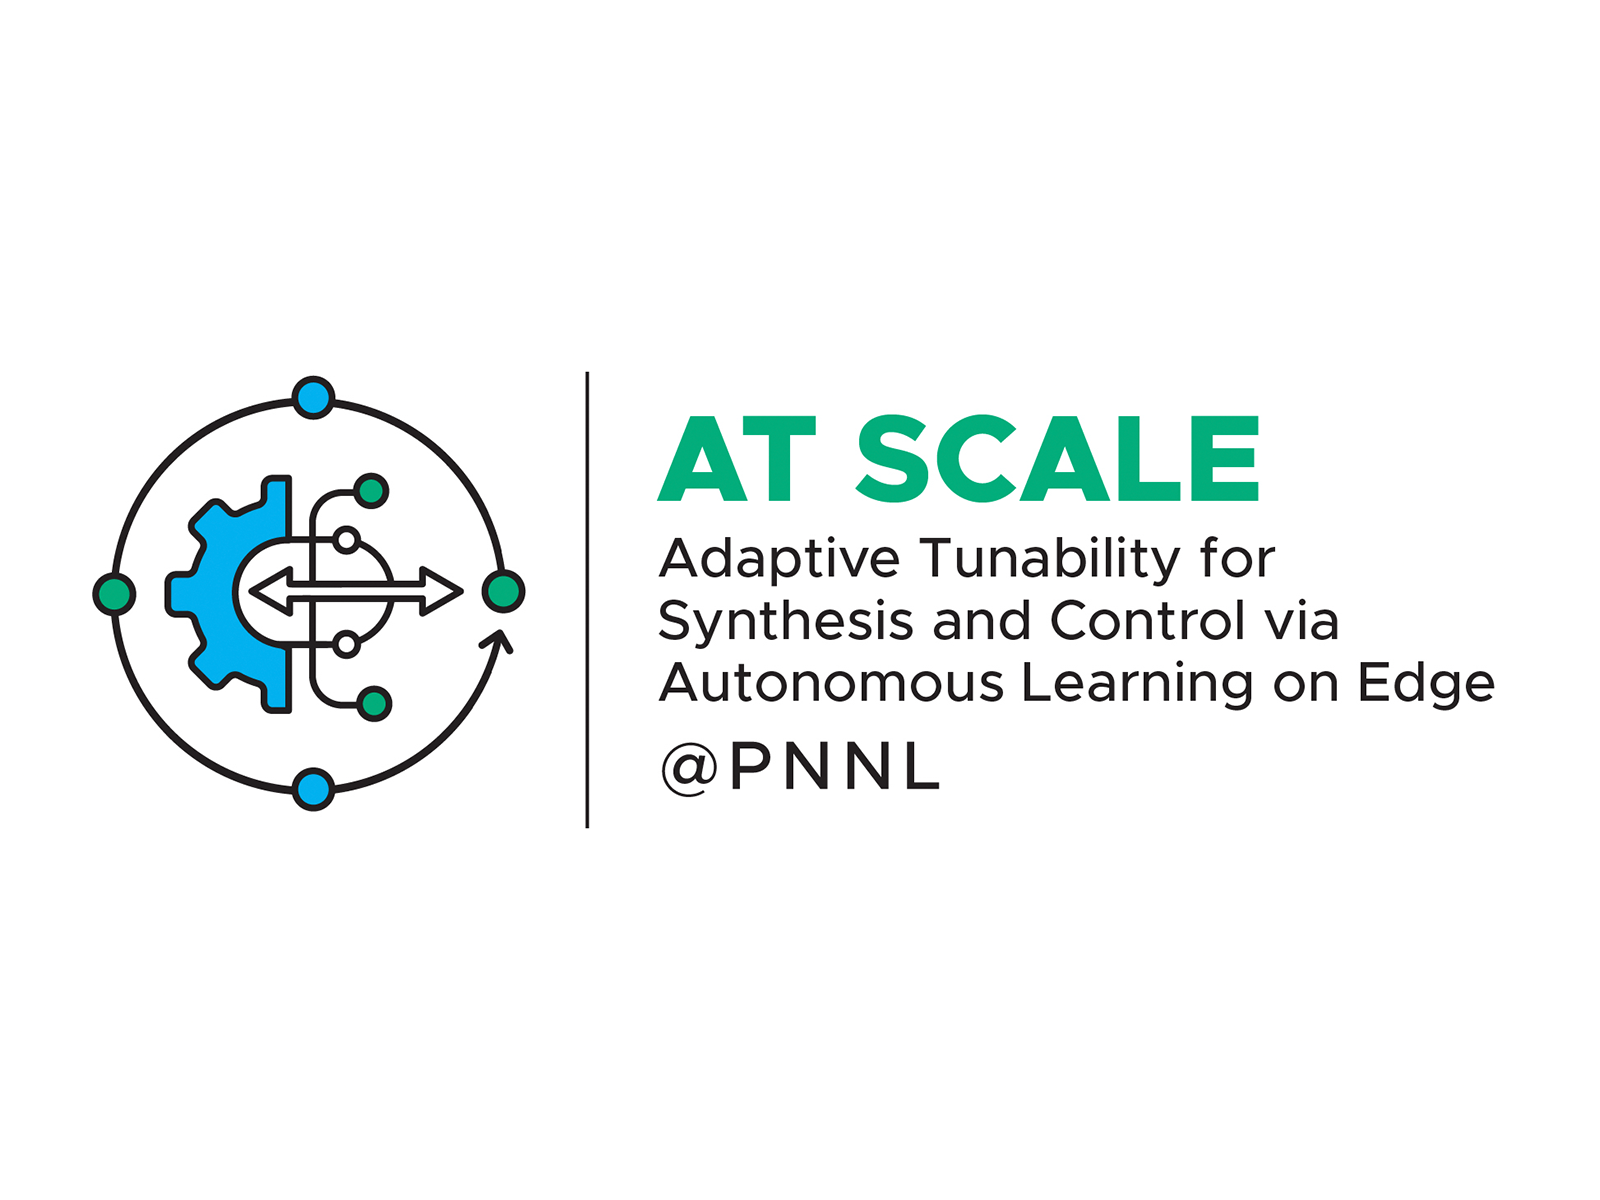 Adaptive Tunability for Synthesis and Control via Autonomous Learning on Edge (AT SCALE)